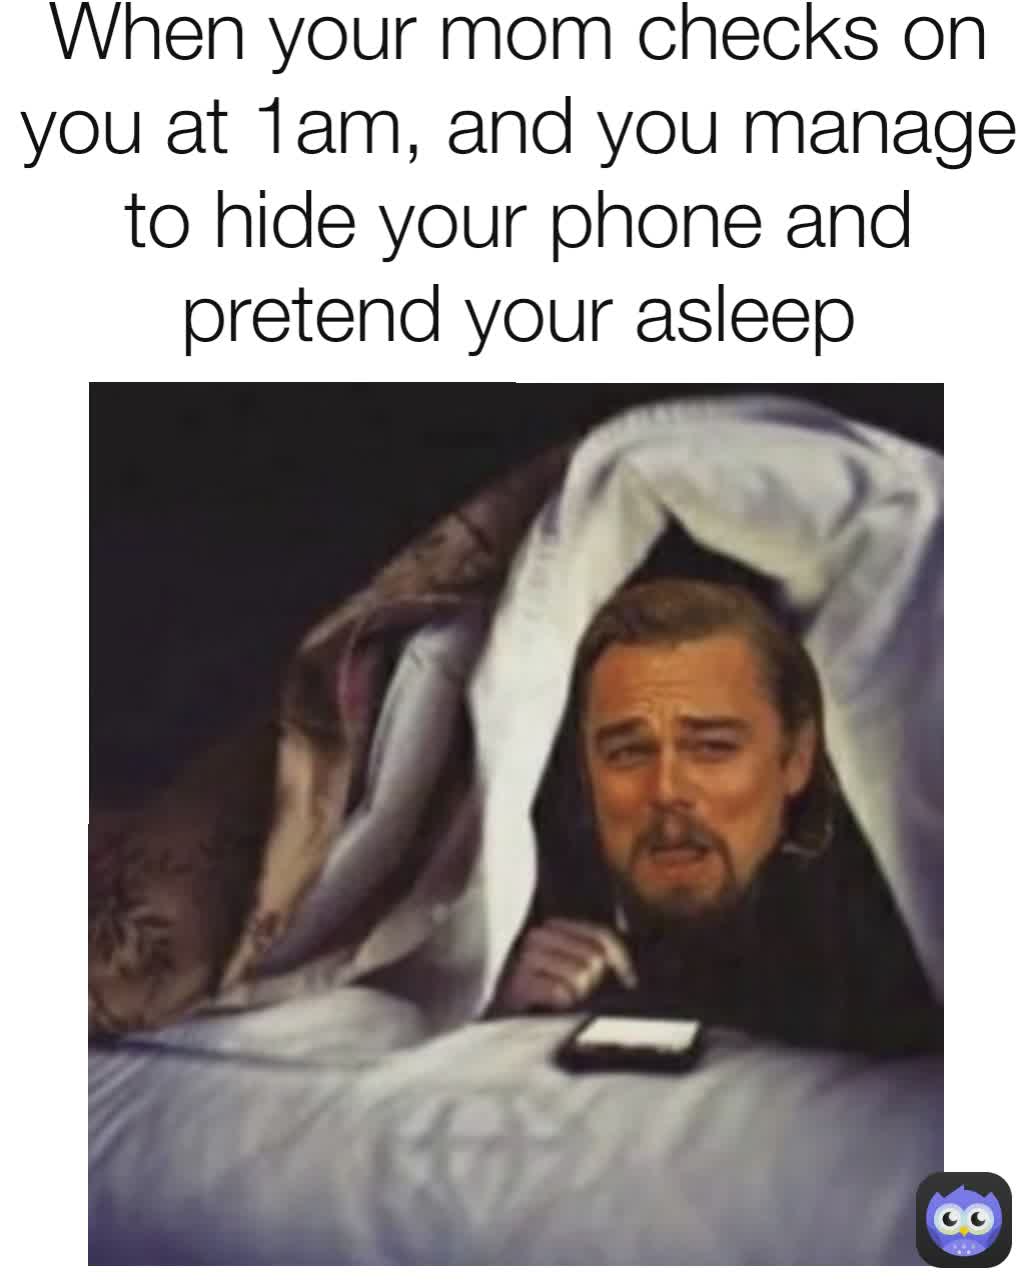 When your mom checks on you at 1am, and you manage to hide your phone and pretend your asleep